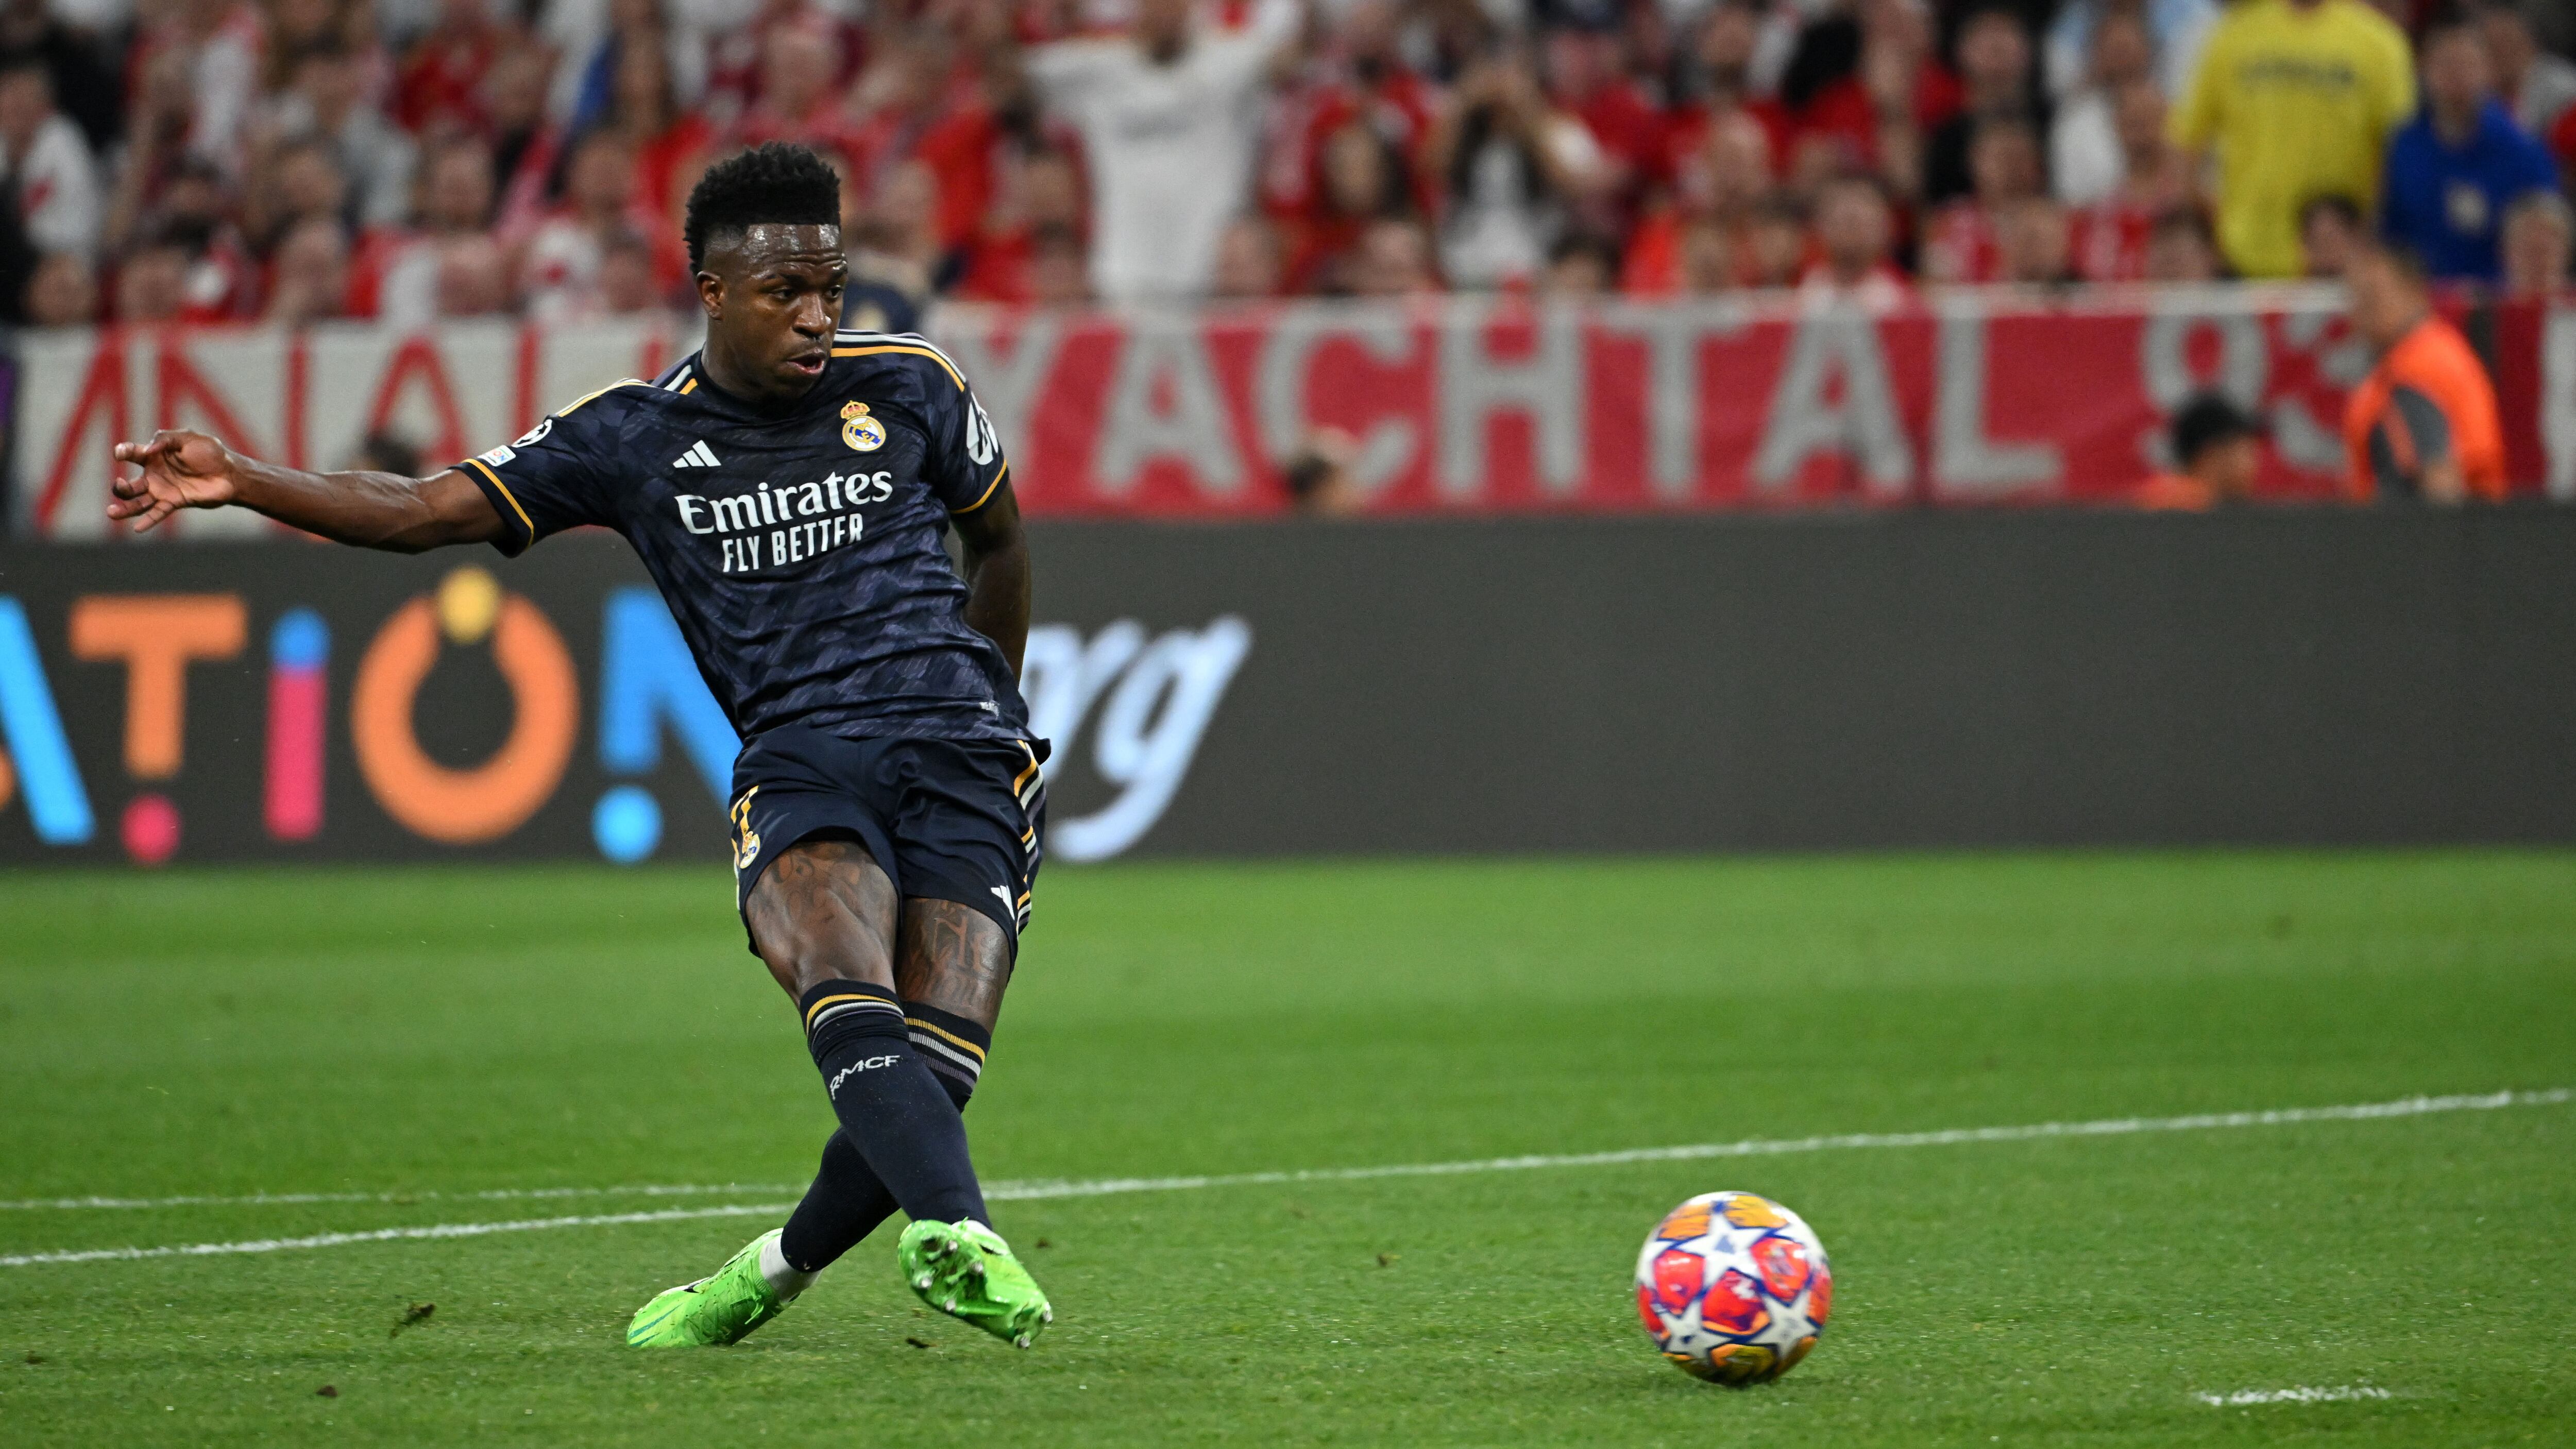 Vinicius Jr bagged a brace to earn Real Madrid a 2-2 draw